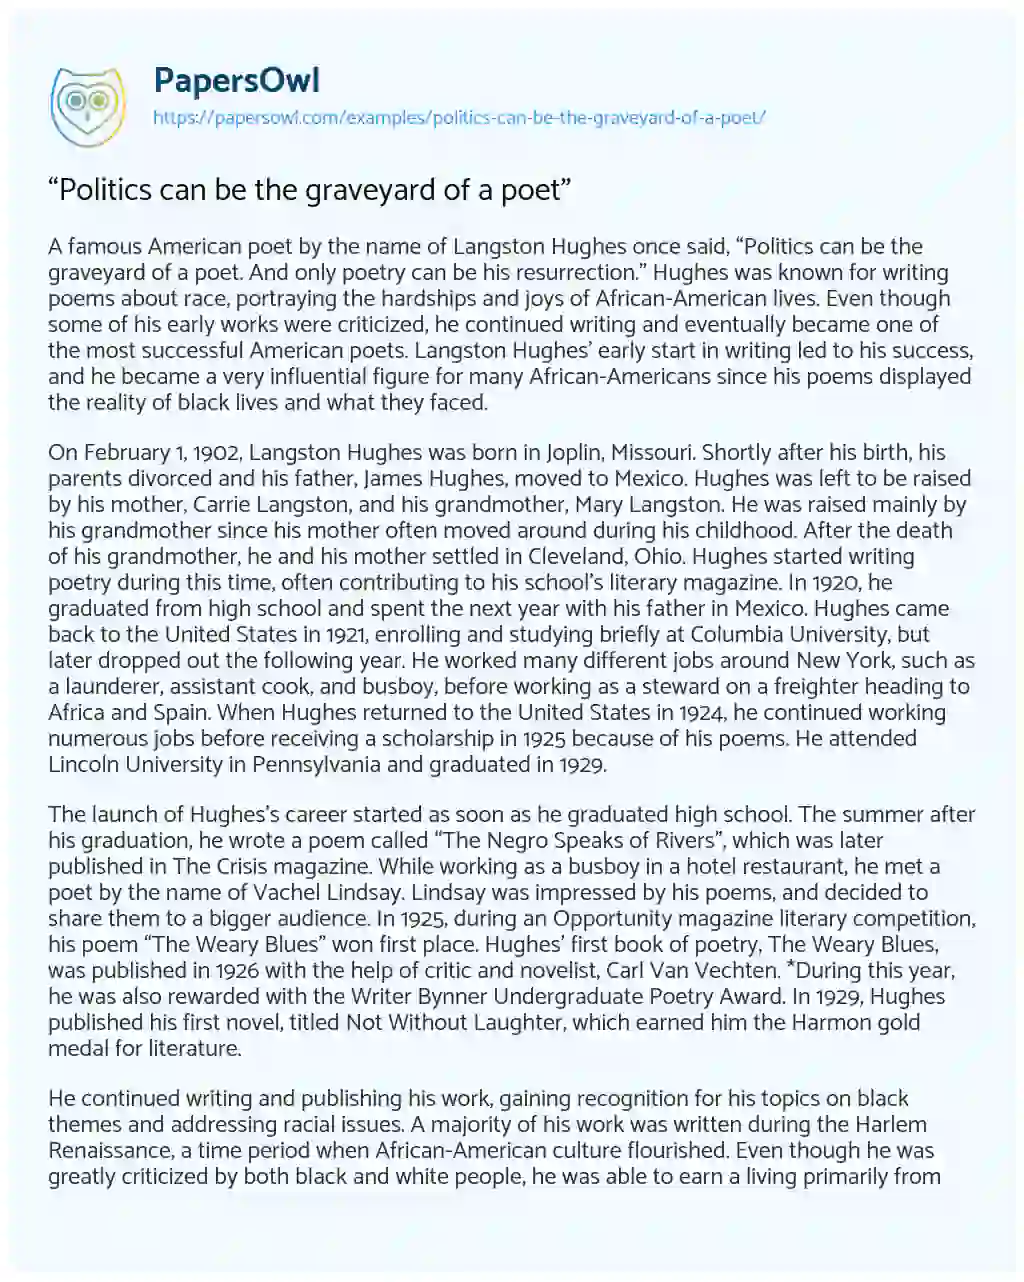 “Politics Can be the Graveyard of a Poet” essay